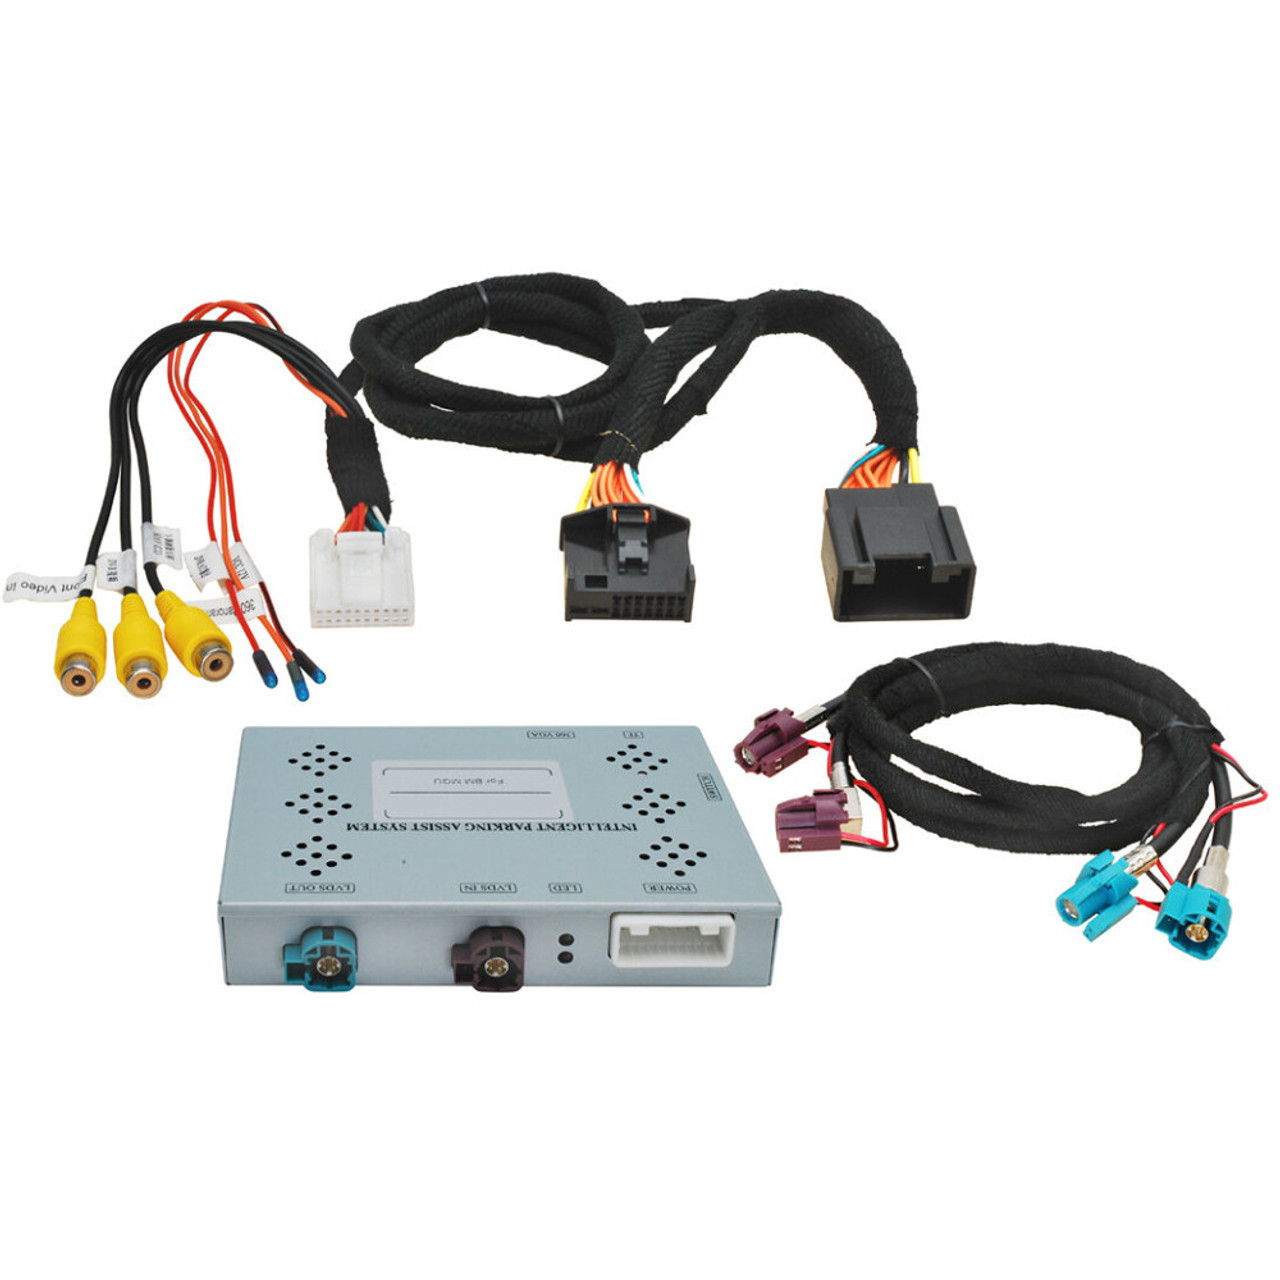 ATD CIK-27574 Add Camera To Factory Radio For BMW With 10.2